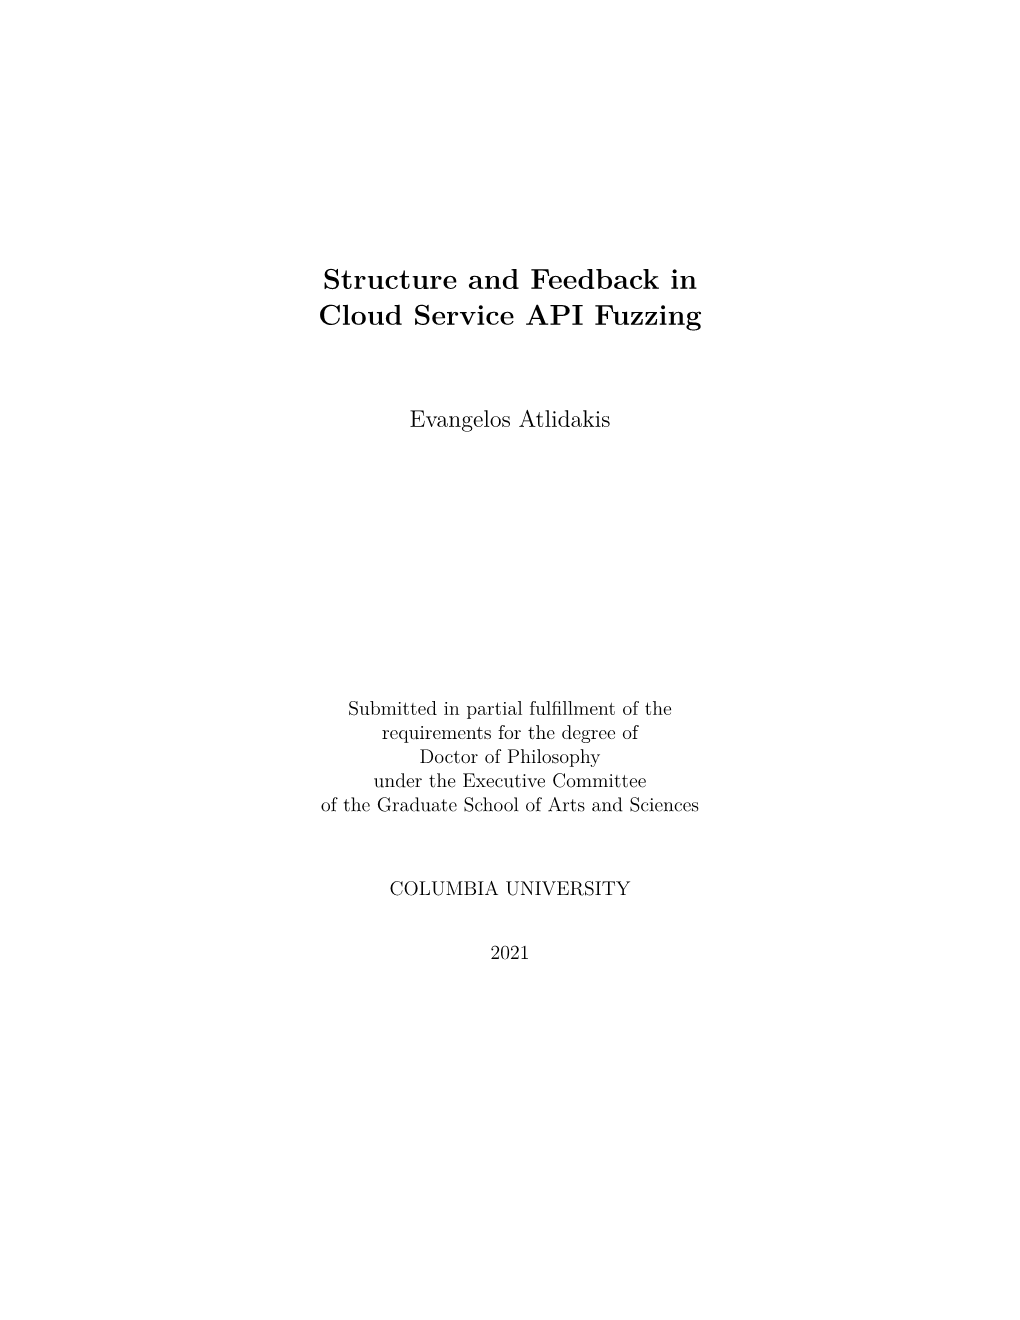 Structure and Feedback in Cloud Service API Fuzzing